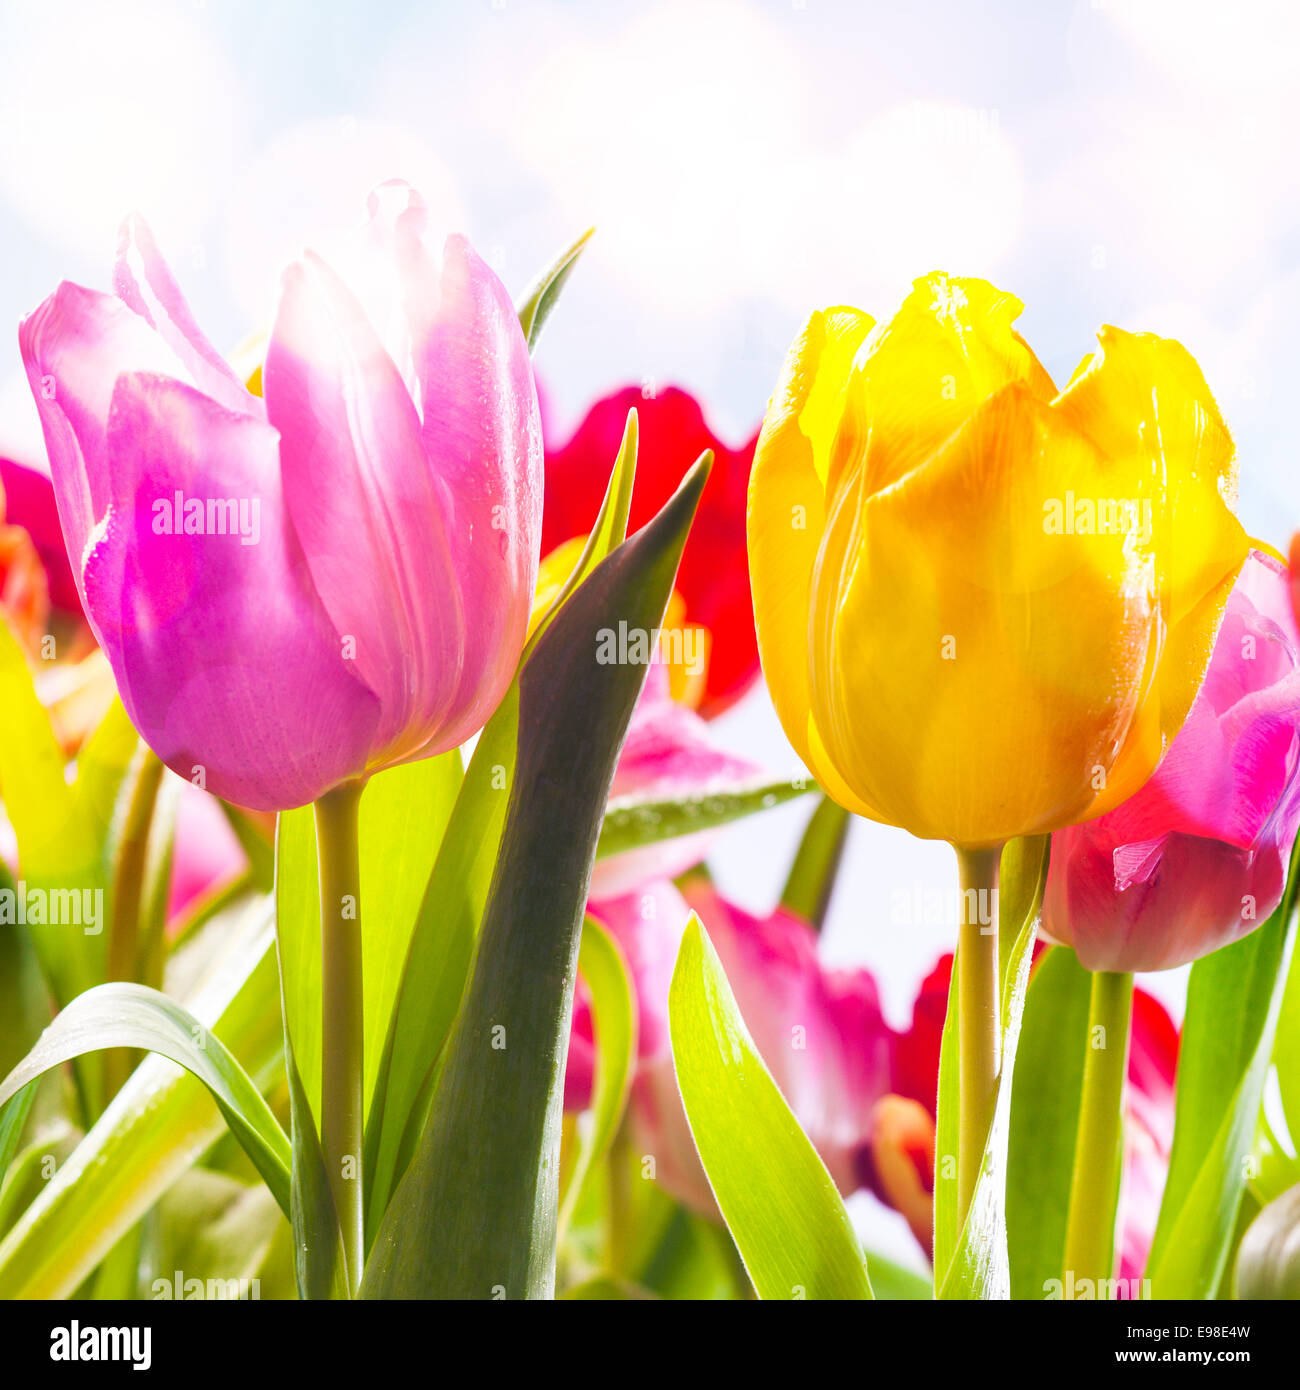 Closeup of two vibrant fresh pink and yellow tulips growing outdoors in a flowerbed in spring sunshine symbolic of the season , Stock Photo